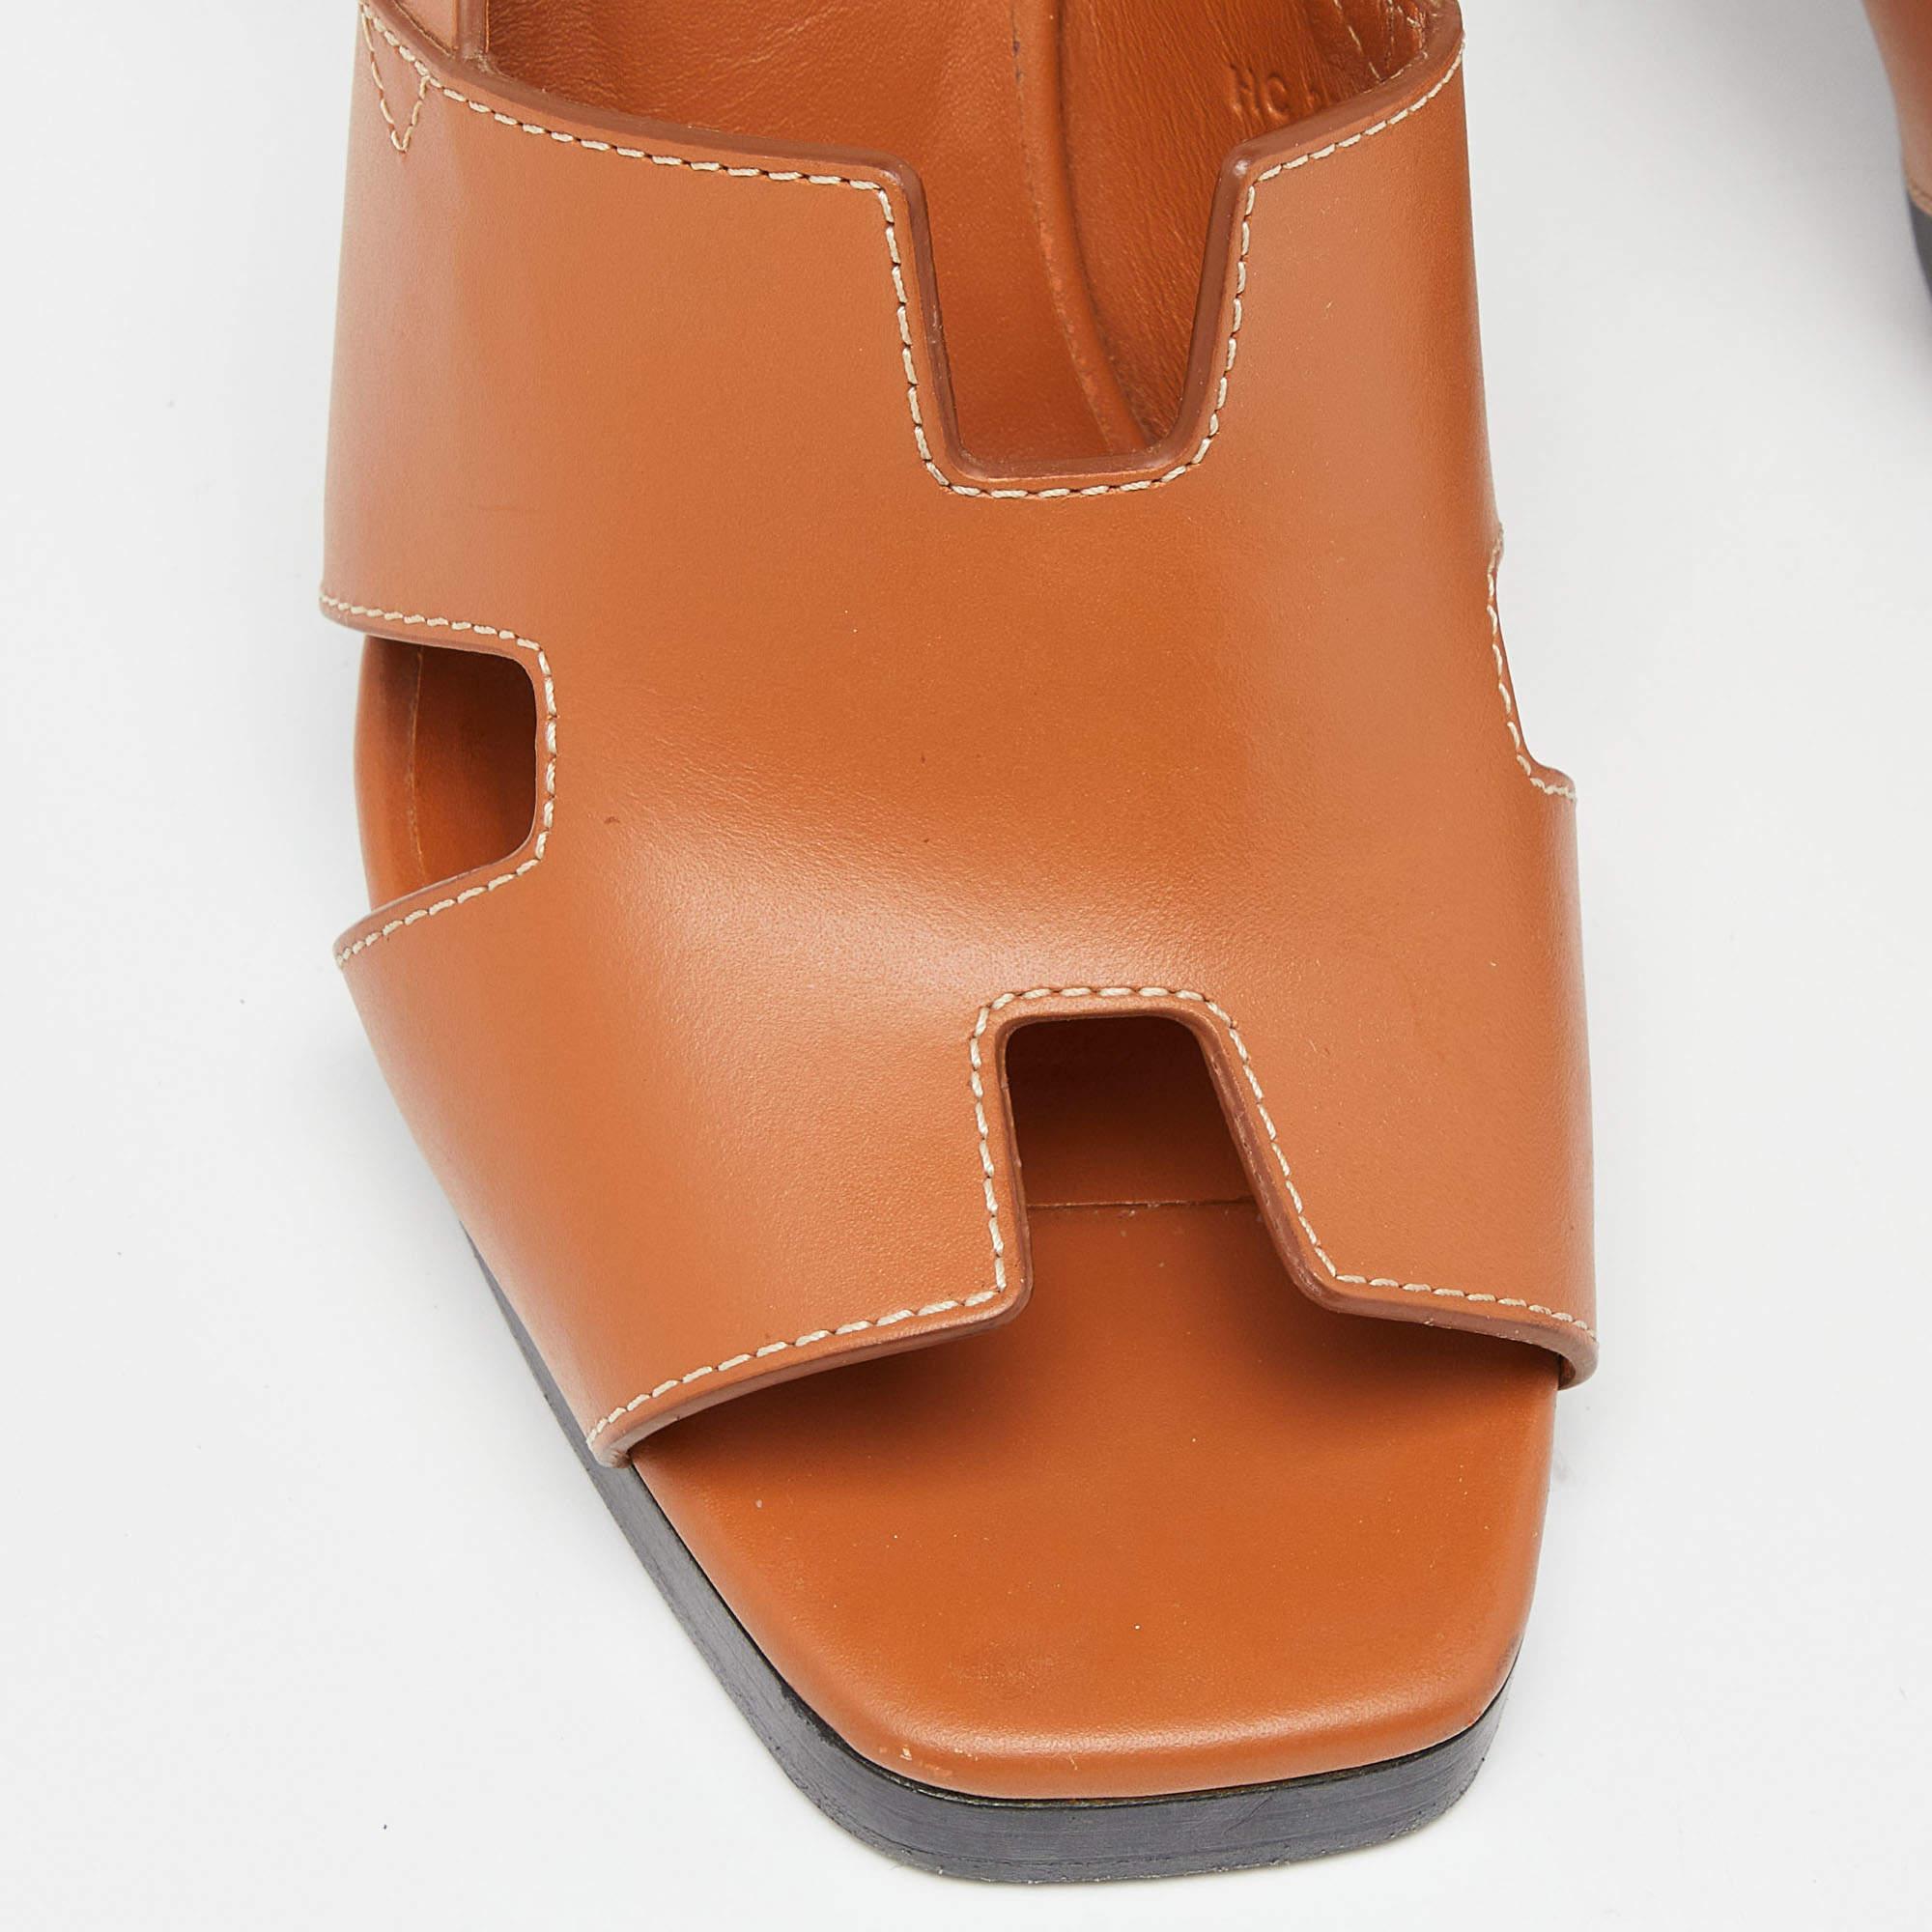 Hermes Tan Leather Elbe Sandals Size 37 1